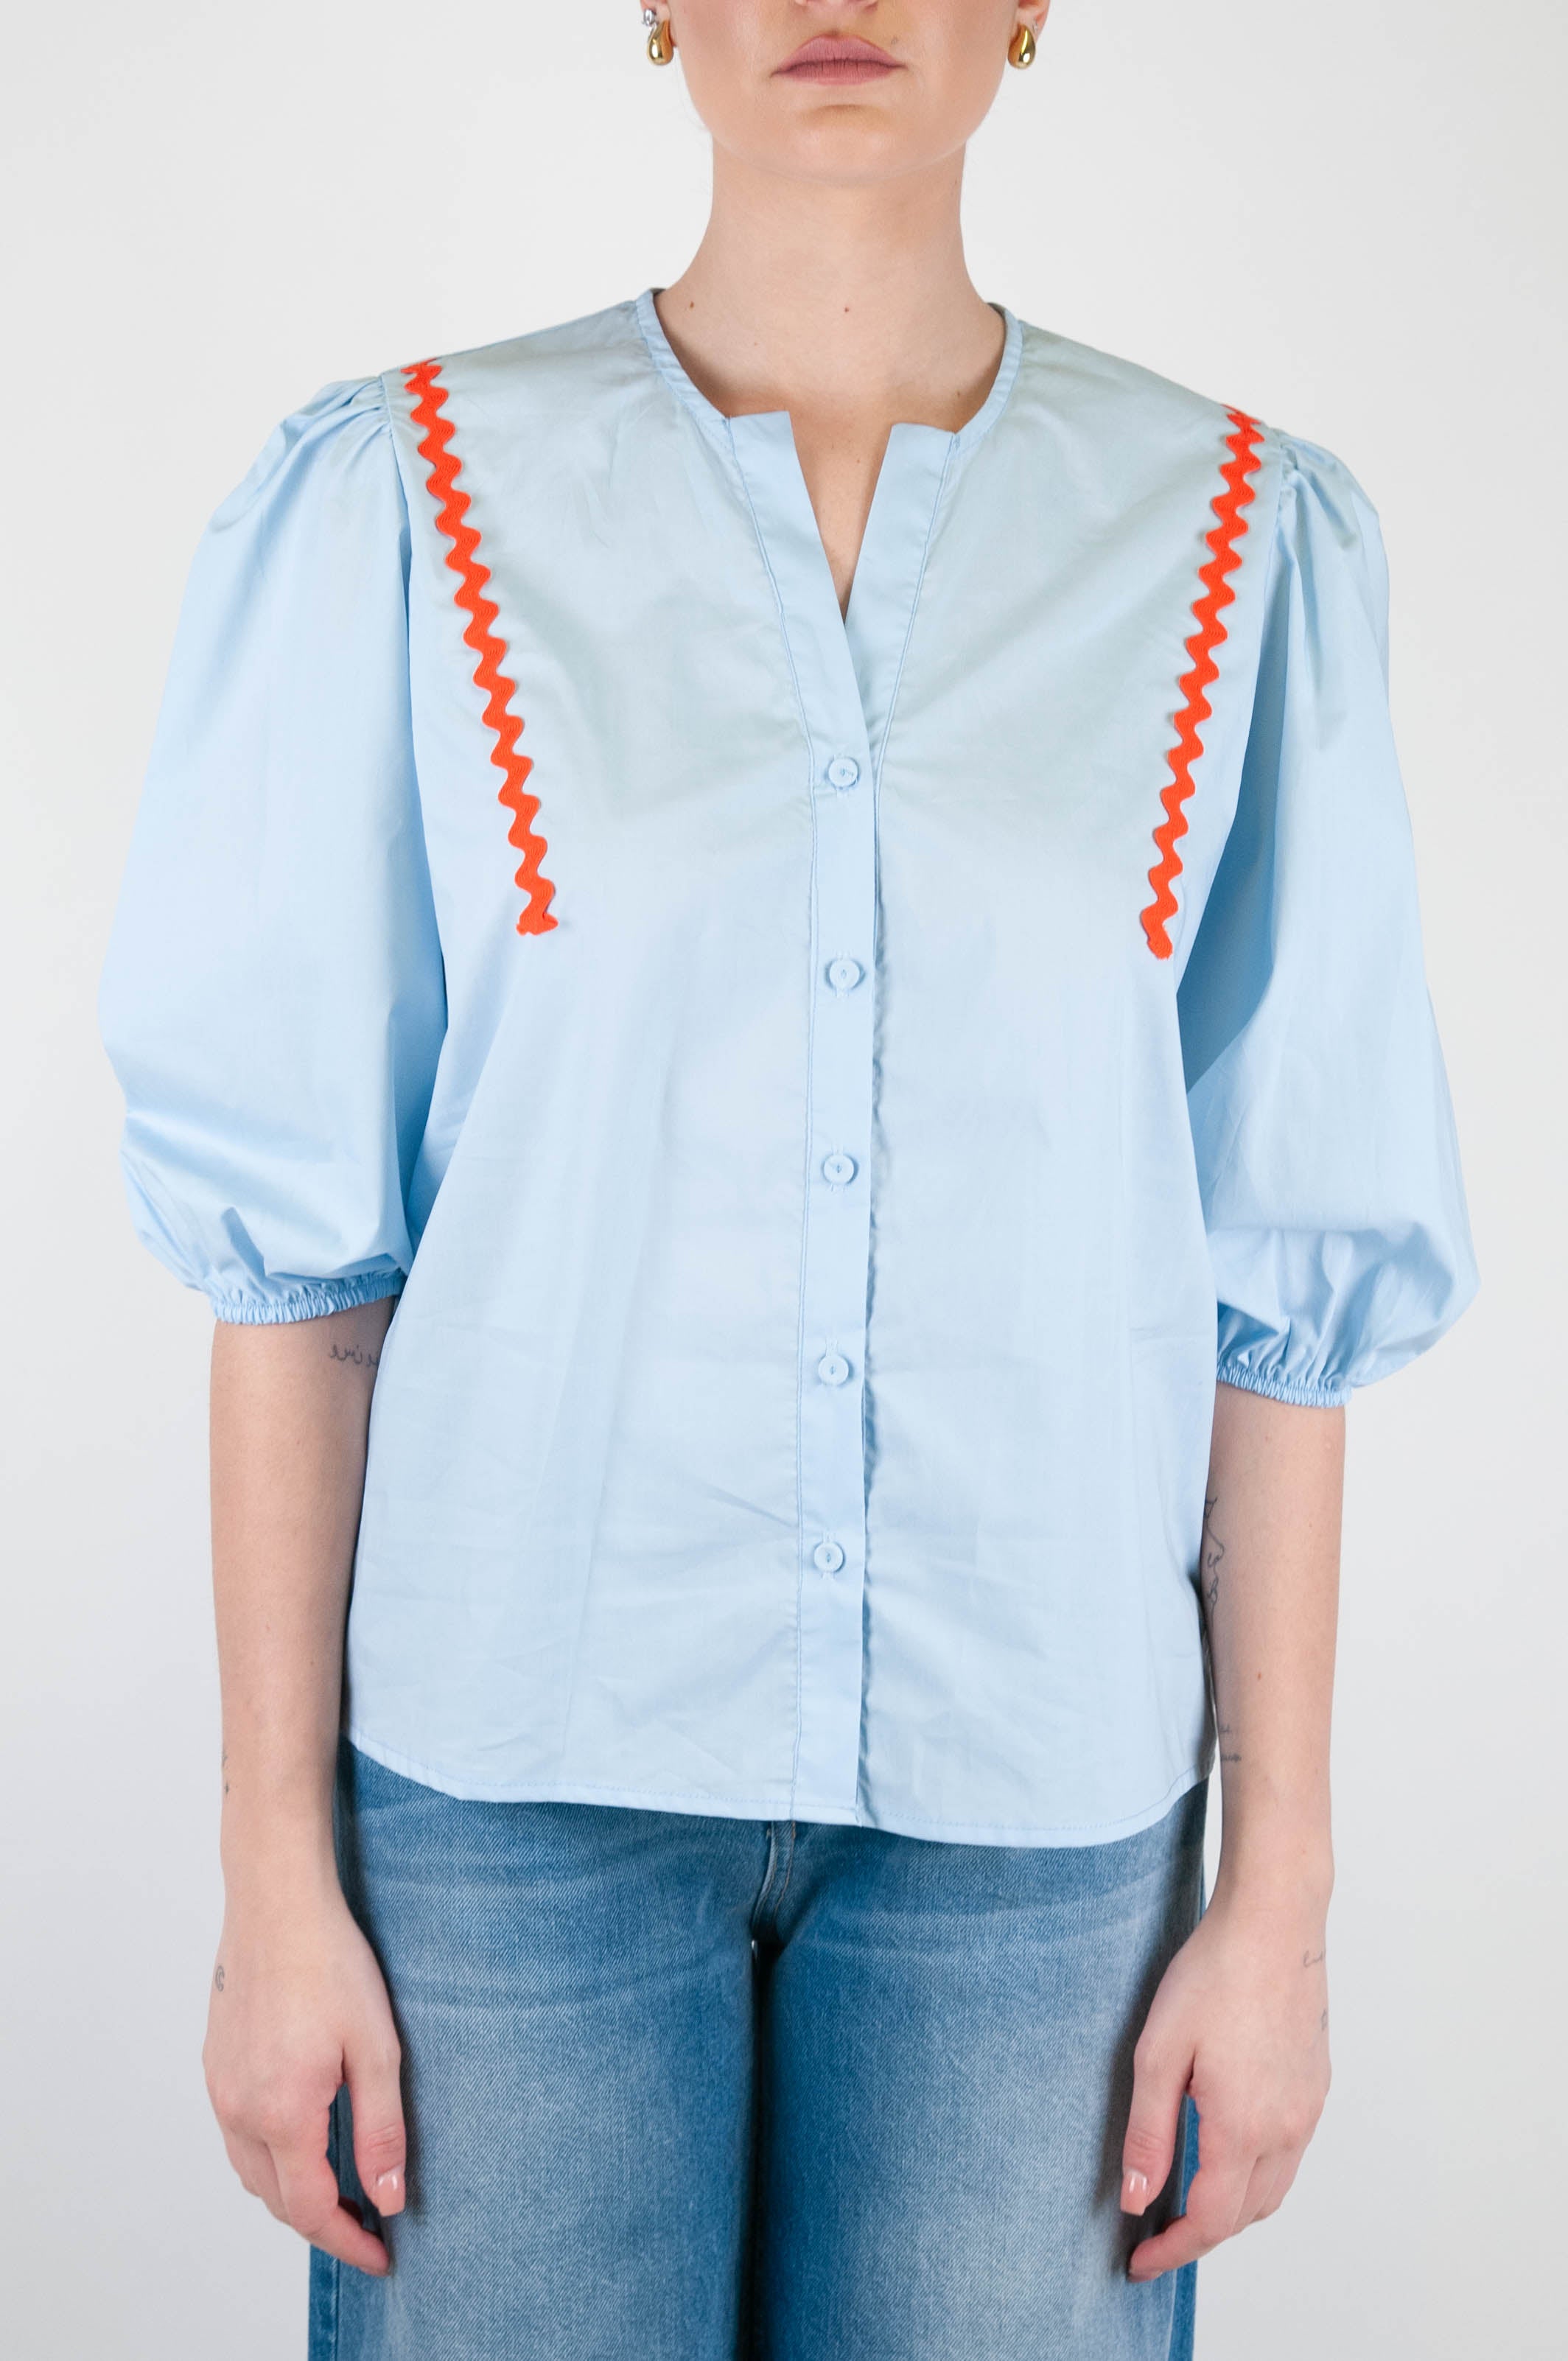 Tension in - Shirt with diagonal contrasting embroidery and three-quarter balloon sleeves